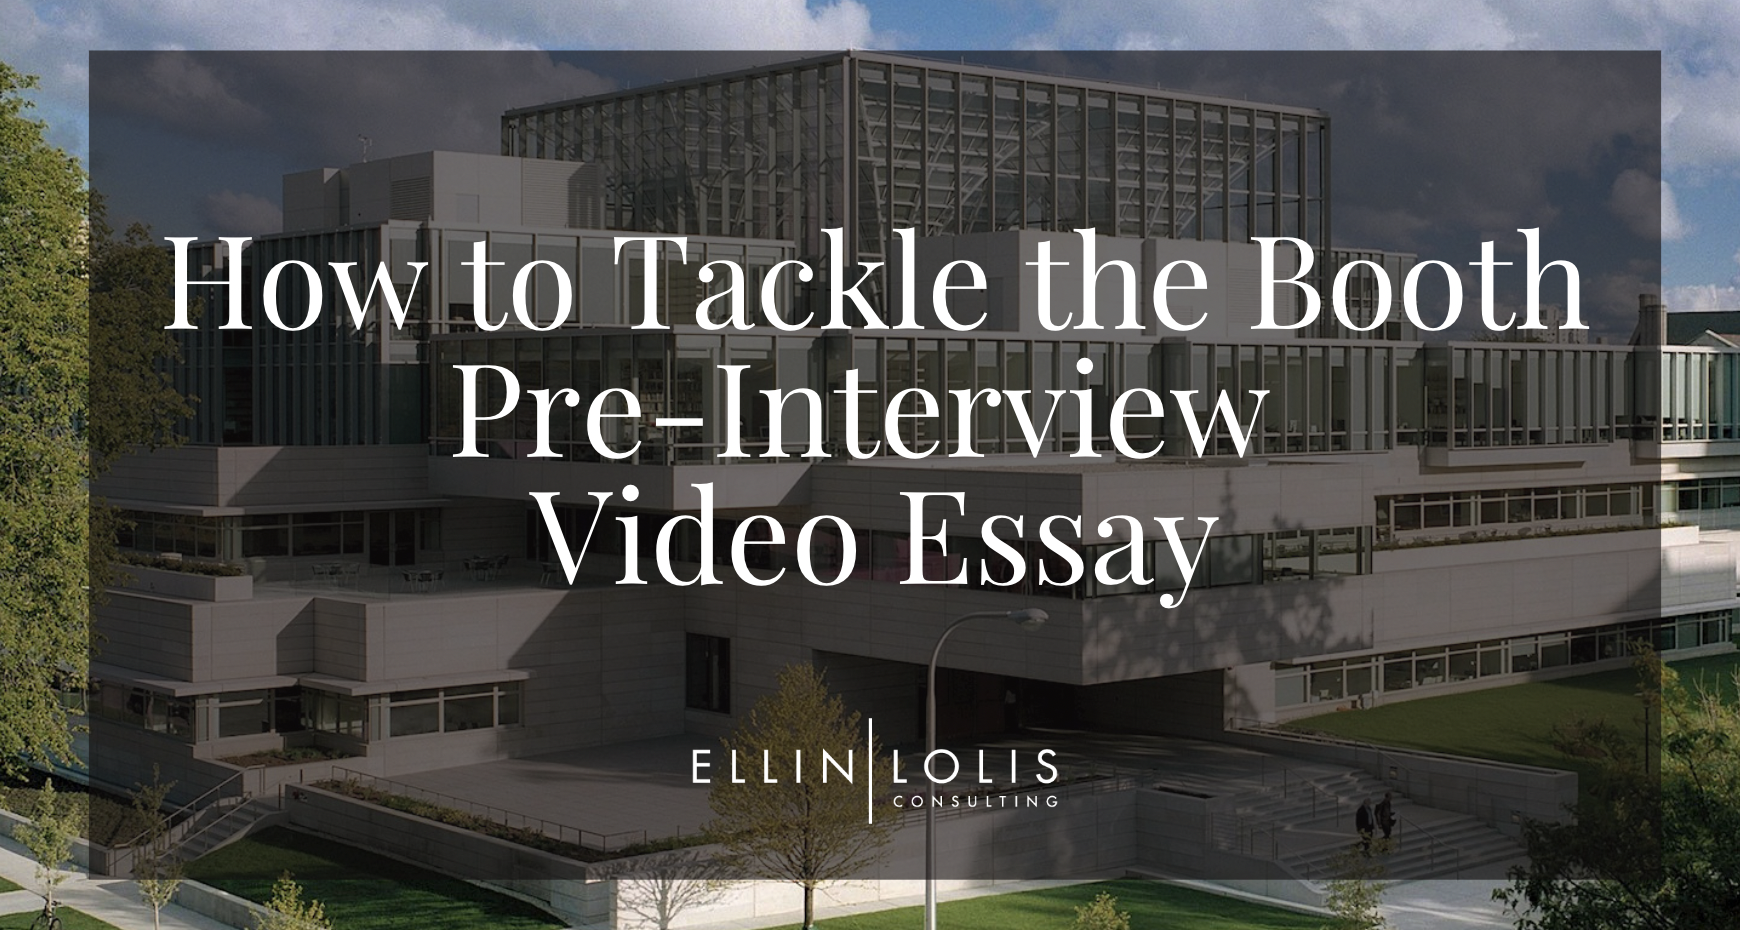 How to Tackle the Booth Pre-Interview Video Essay